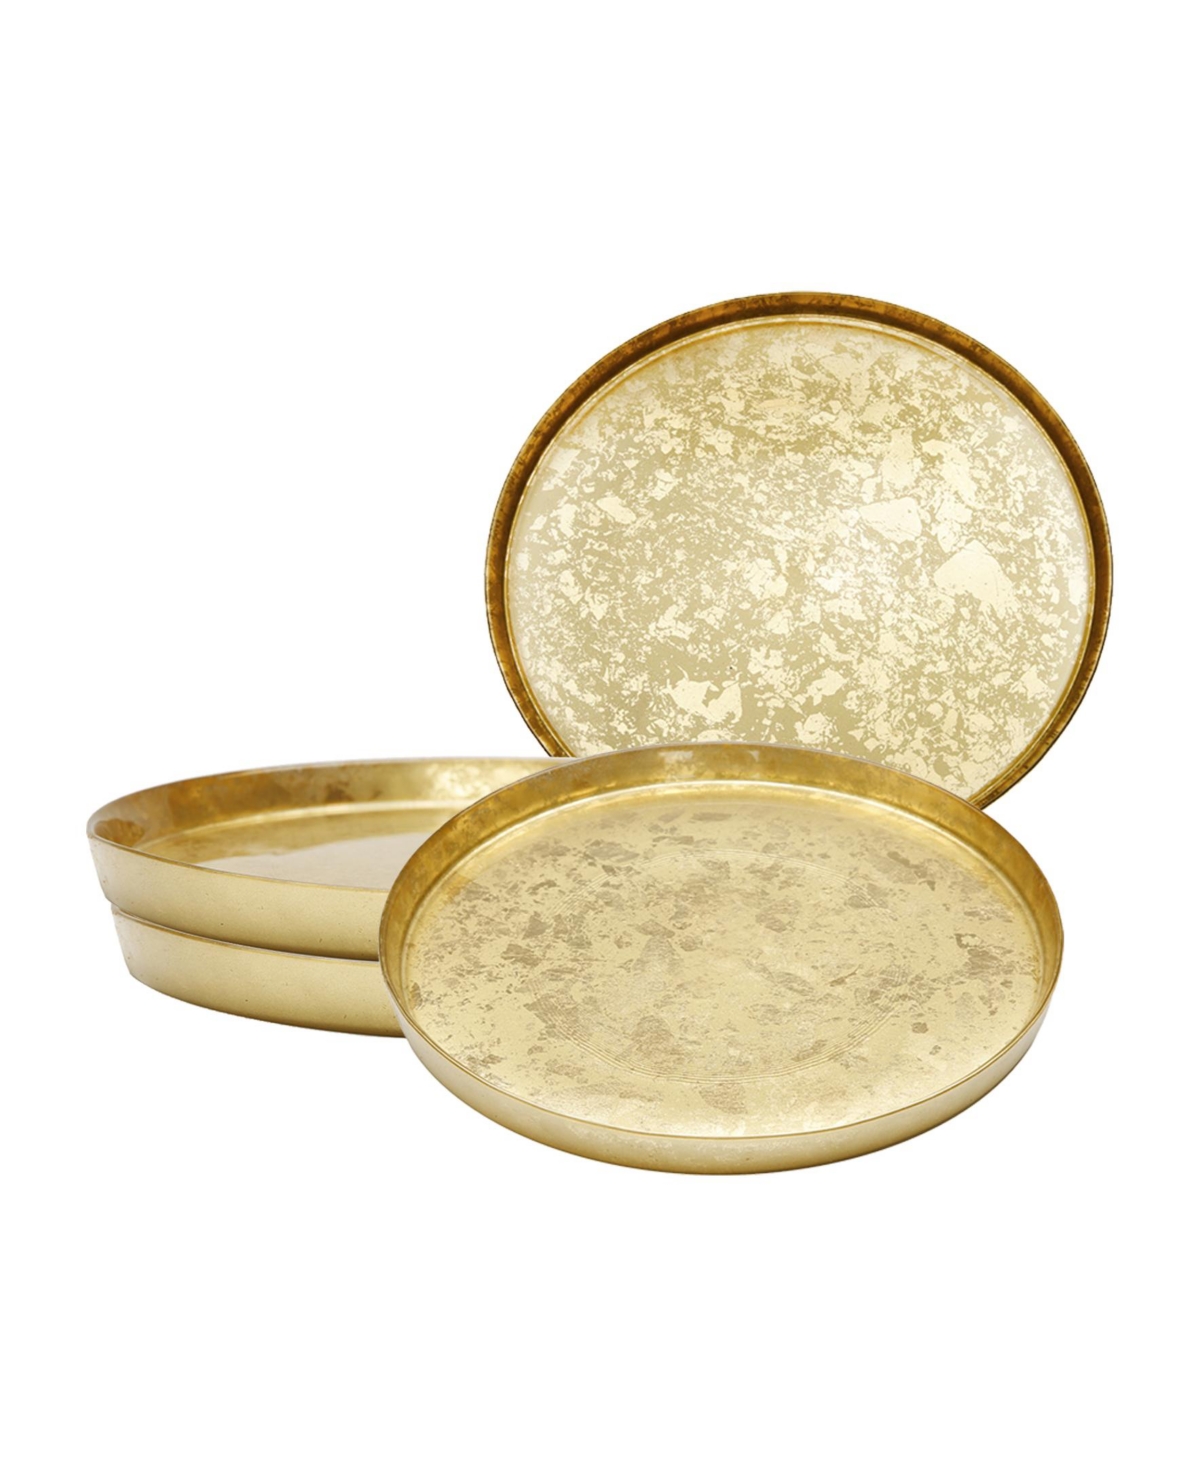 8.25" Gold Gliter Salad Plates with Rasied Rim 4 Piece Set, Service for 4 - Gold